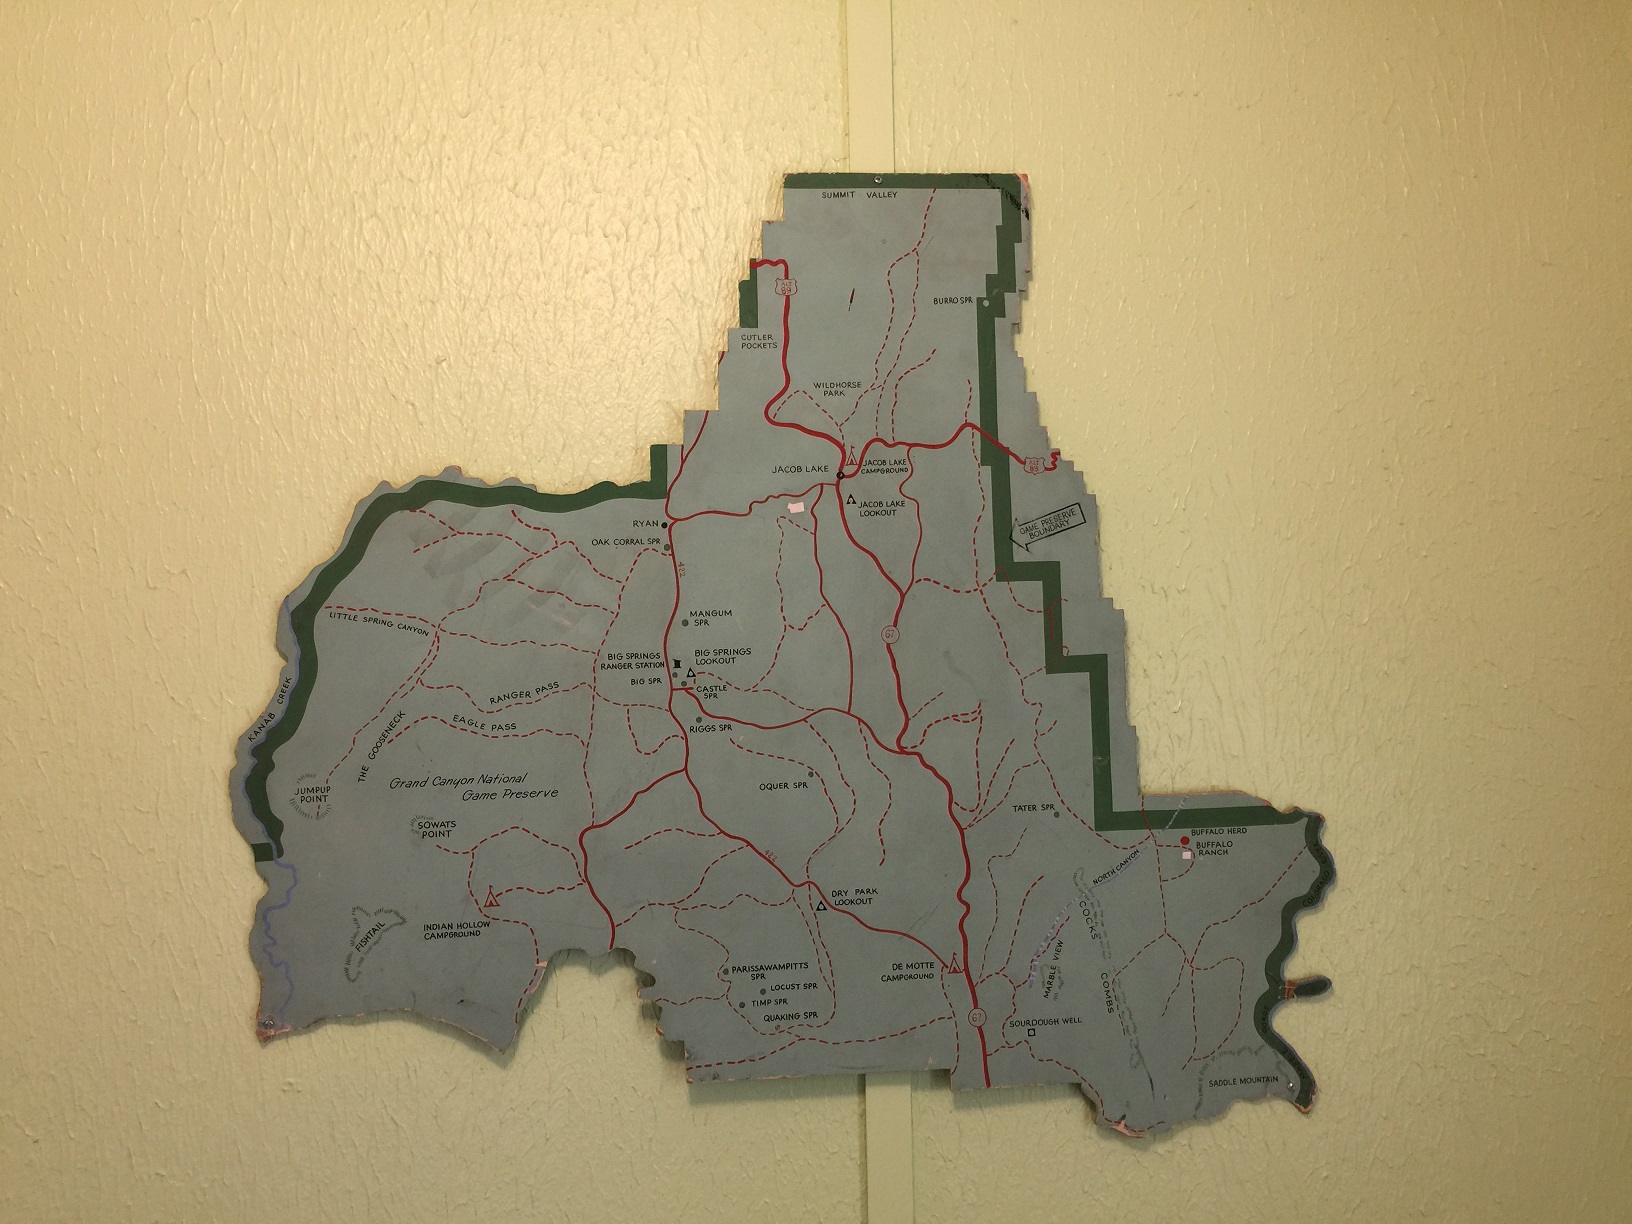 A map on the wall of Cabin 1 at the Big Springs Rental Cabins